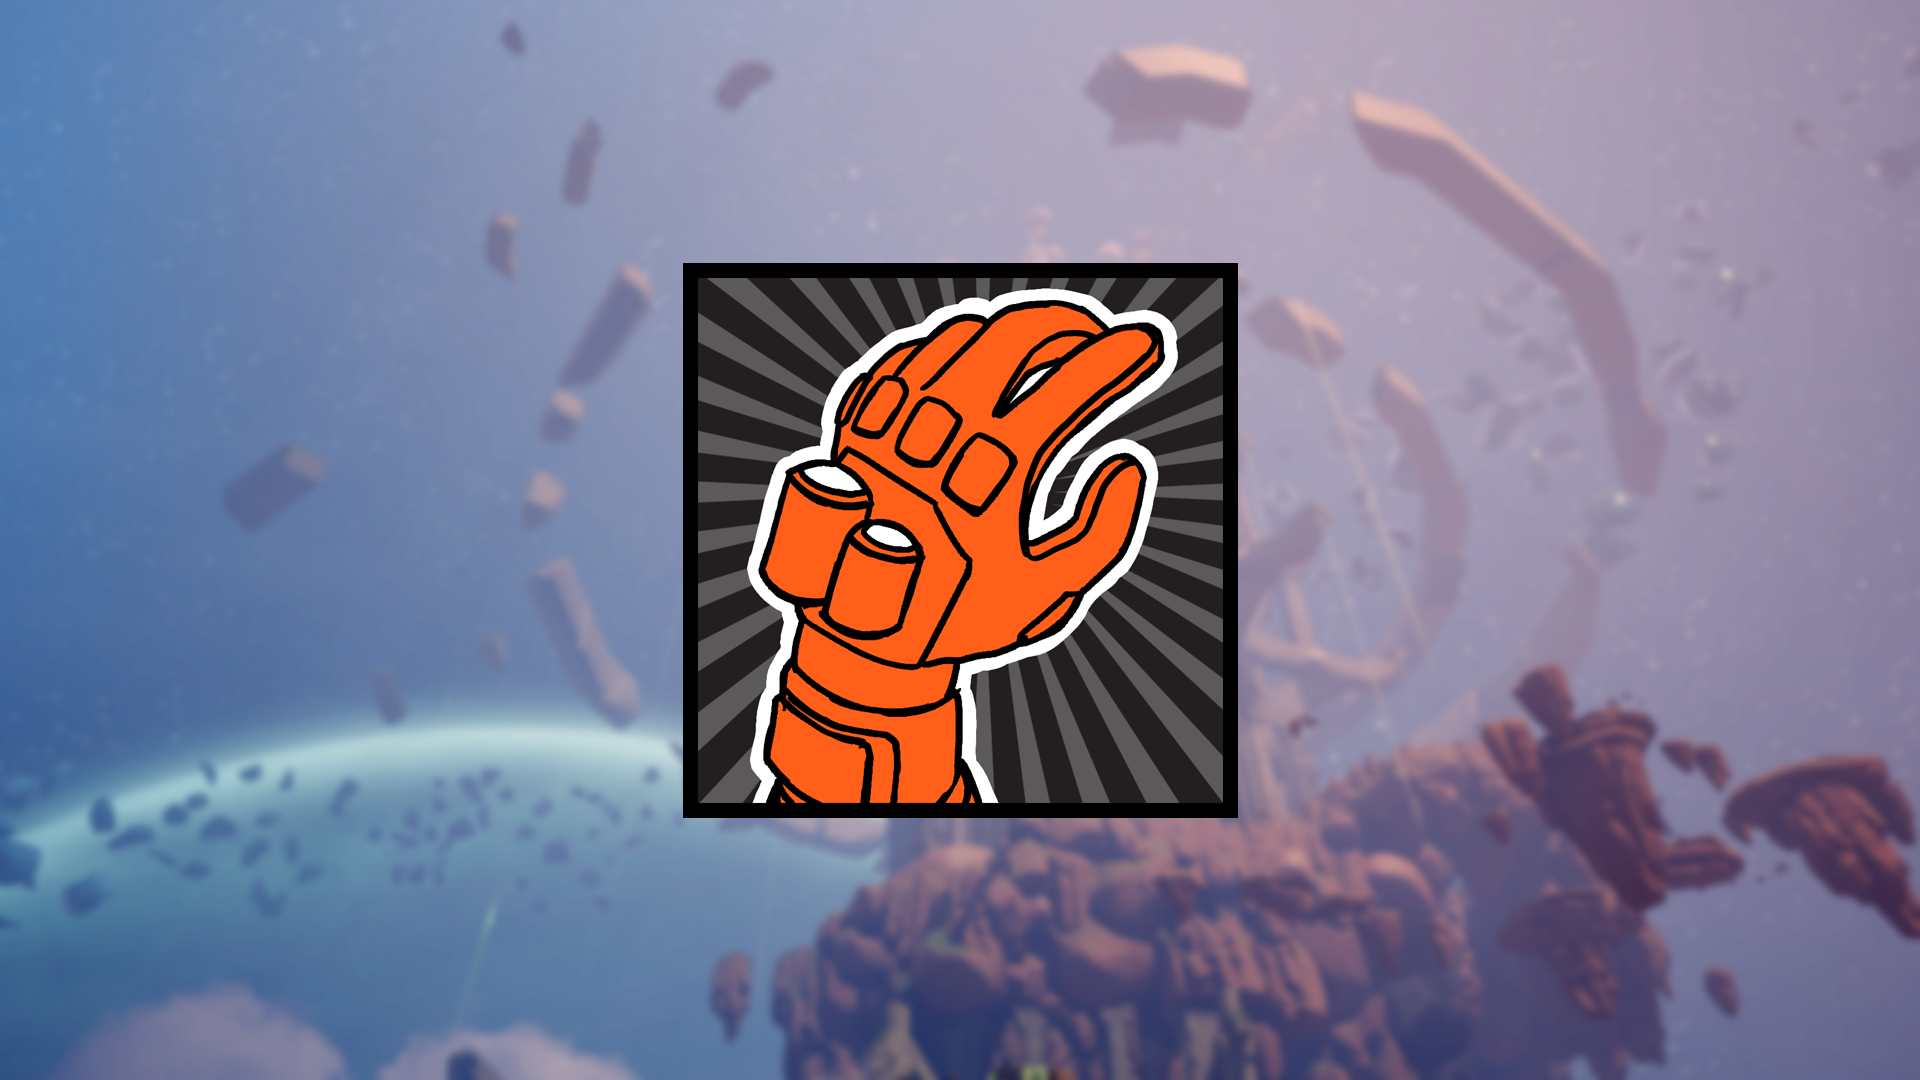 Icon for Ambidextrous